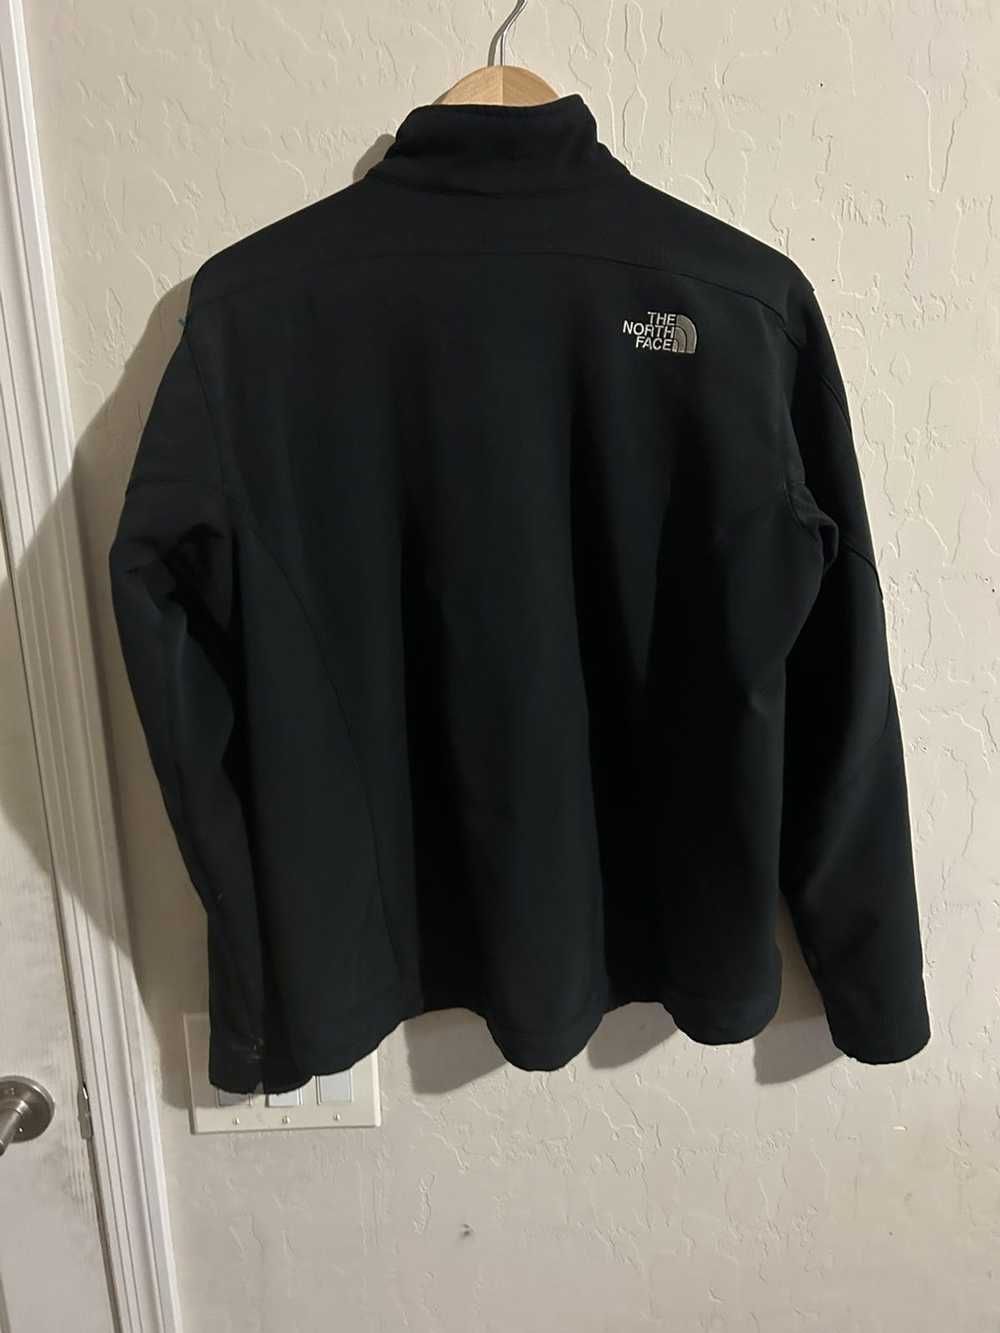 The North Face North Face Apex Jacket - image 5